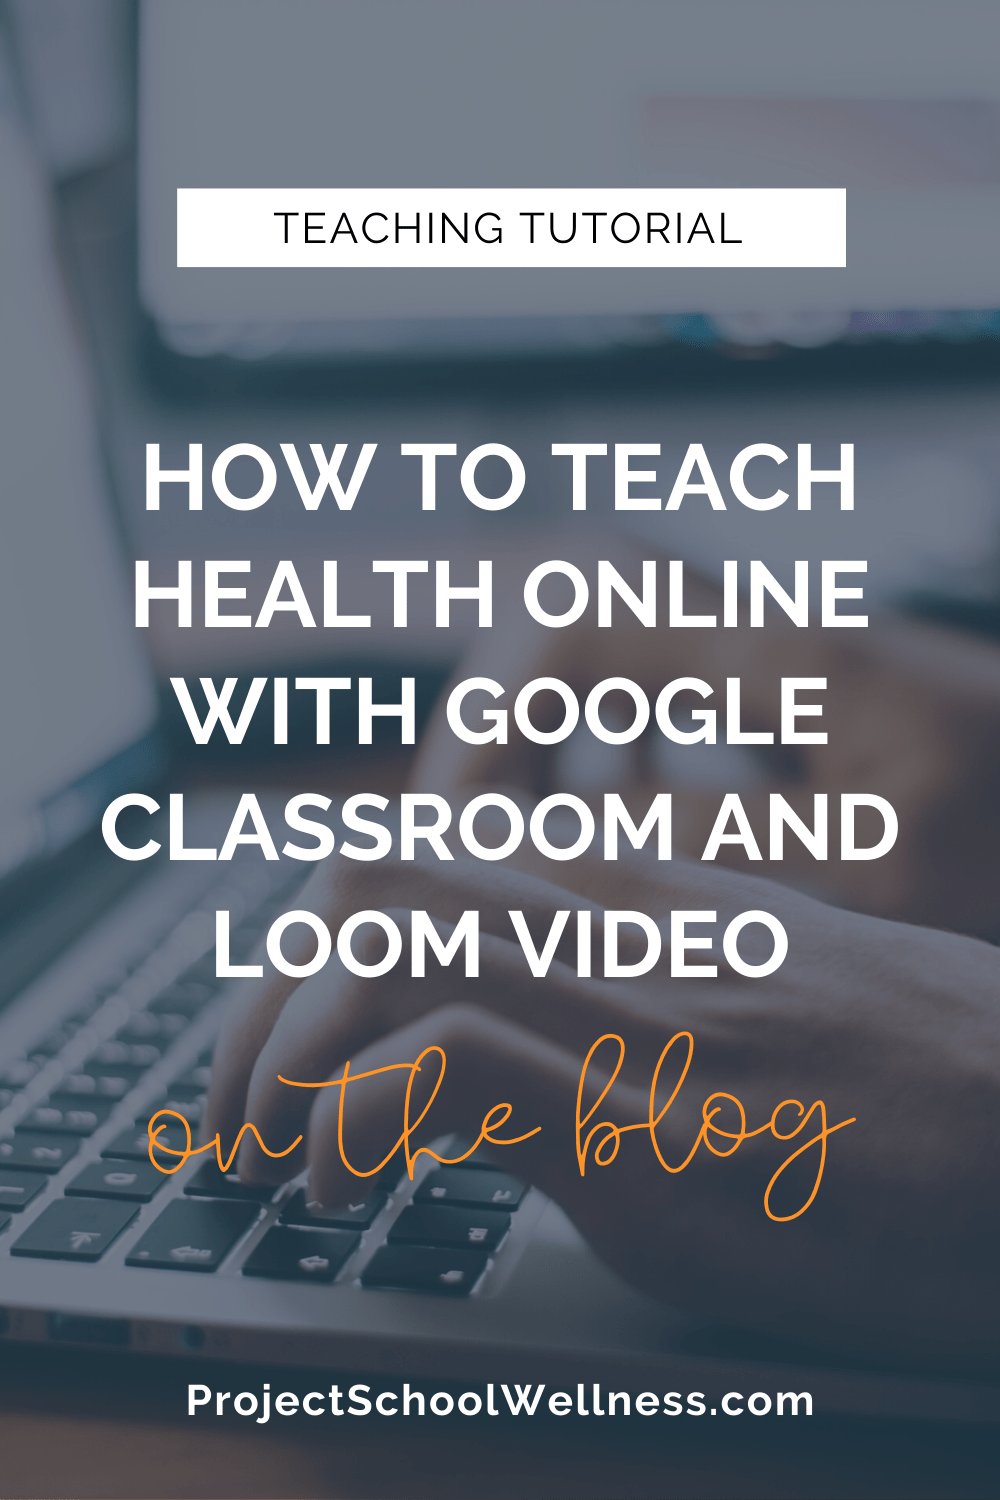 Learn how to teach health education online with Google Classroom and Loom Video with this free digital learning teaching tutorial. This health education tutorial will help middle school and high school teachers launch their digital classroom and digital learning experience. This health teacher blog post shares digital classroom ideas, digital classroom management, digital classroom design, digital learning activities for middle school Google Classroom and high school Google Classroom.